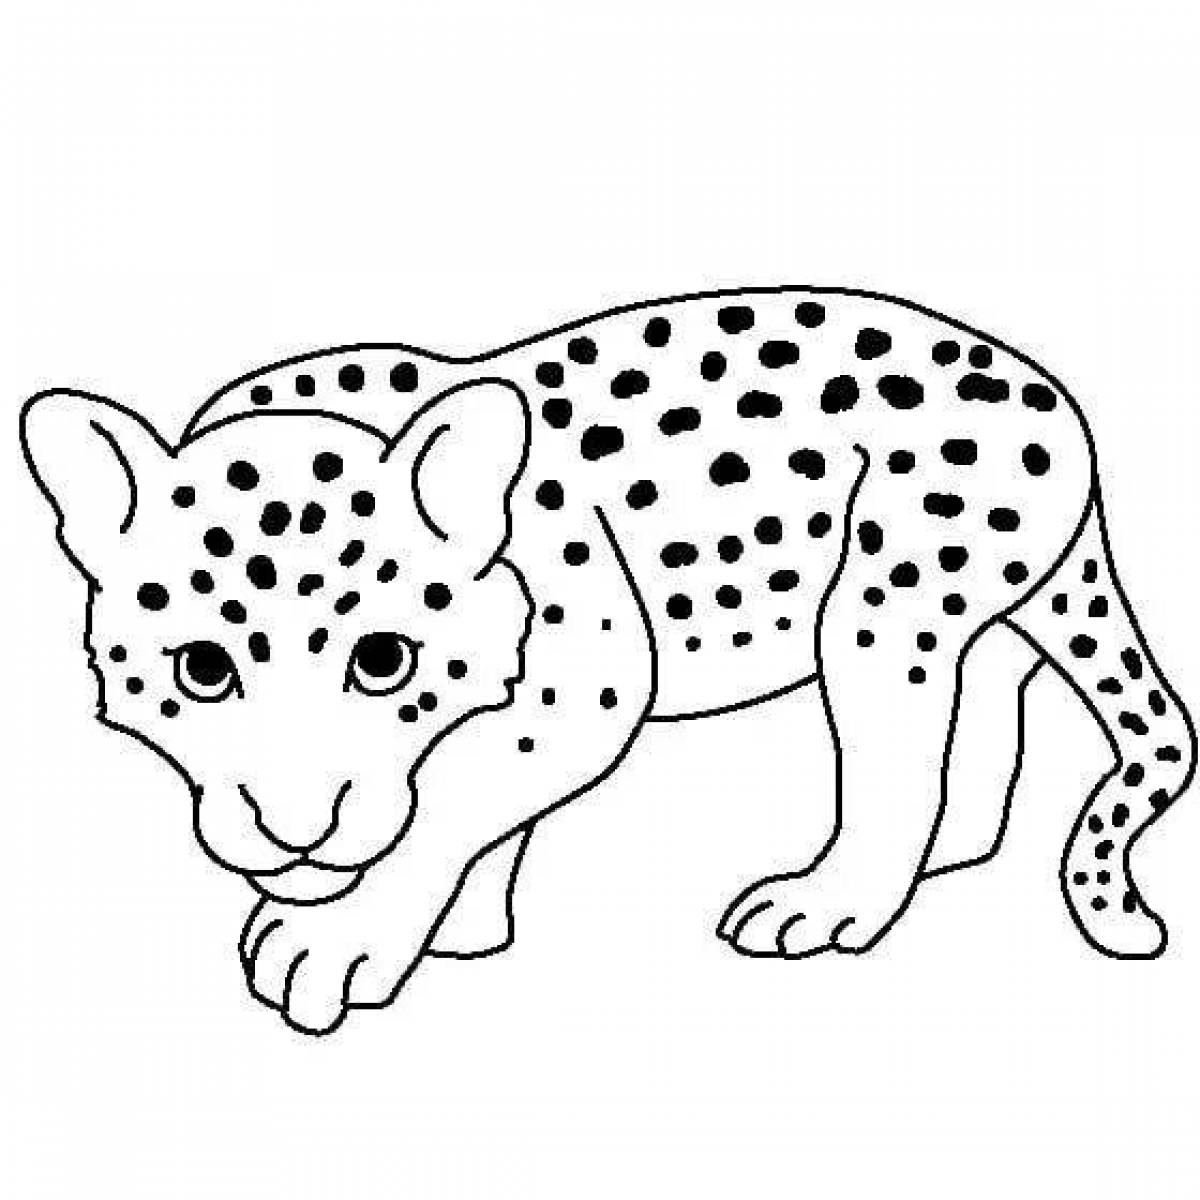 Outstanding cheetah coloring book for kids